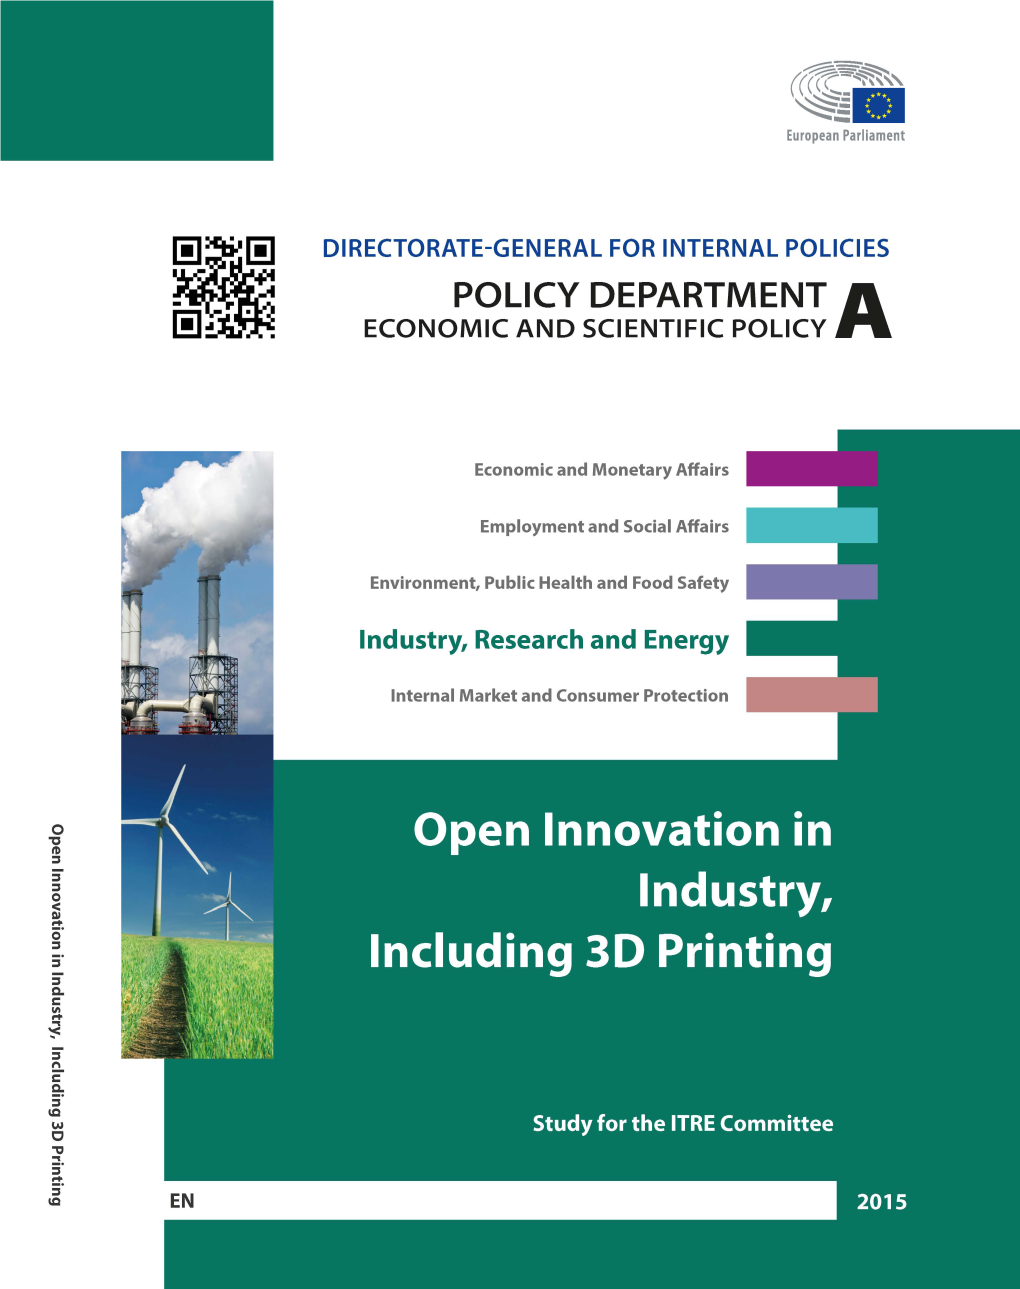 Open Innovation in Industry, Including 3D Printing